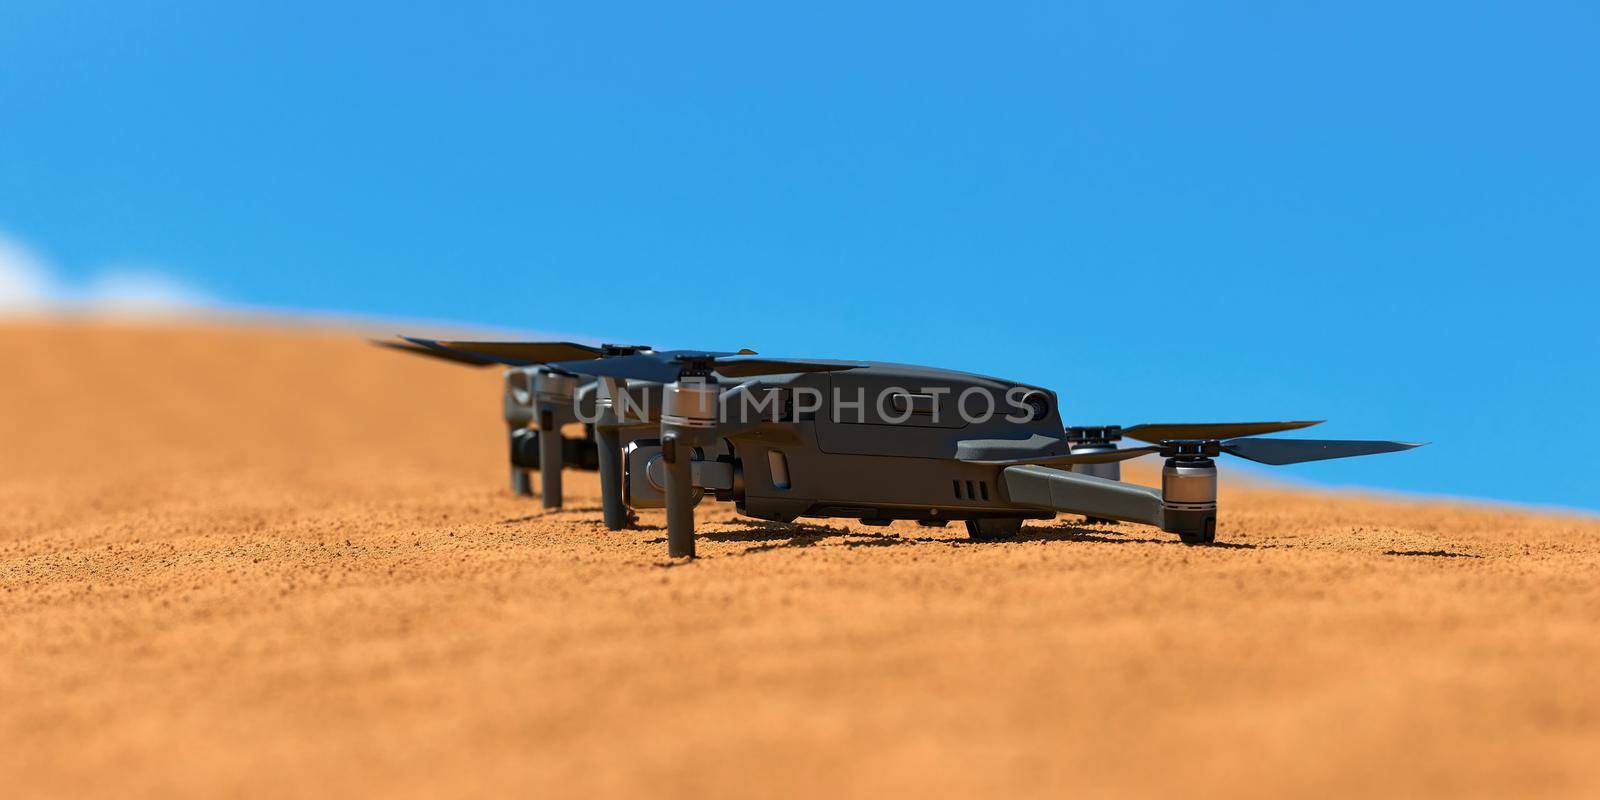 Quadrocopters are built on the sand in the desert waiting for takeoff.